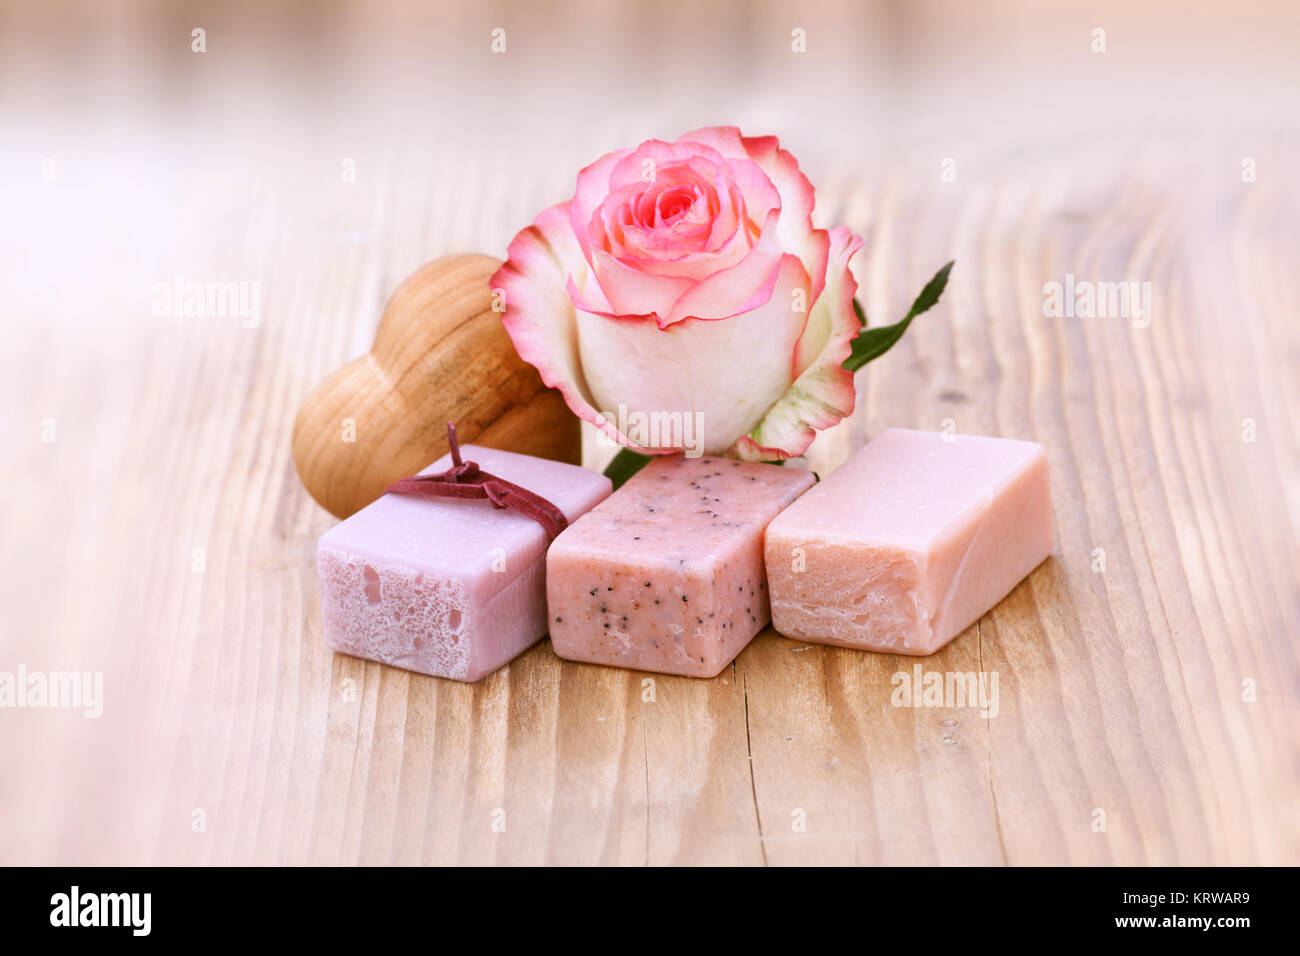 Spa still life with aromatic soap on wood for a spa treatment Stock Photo